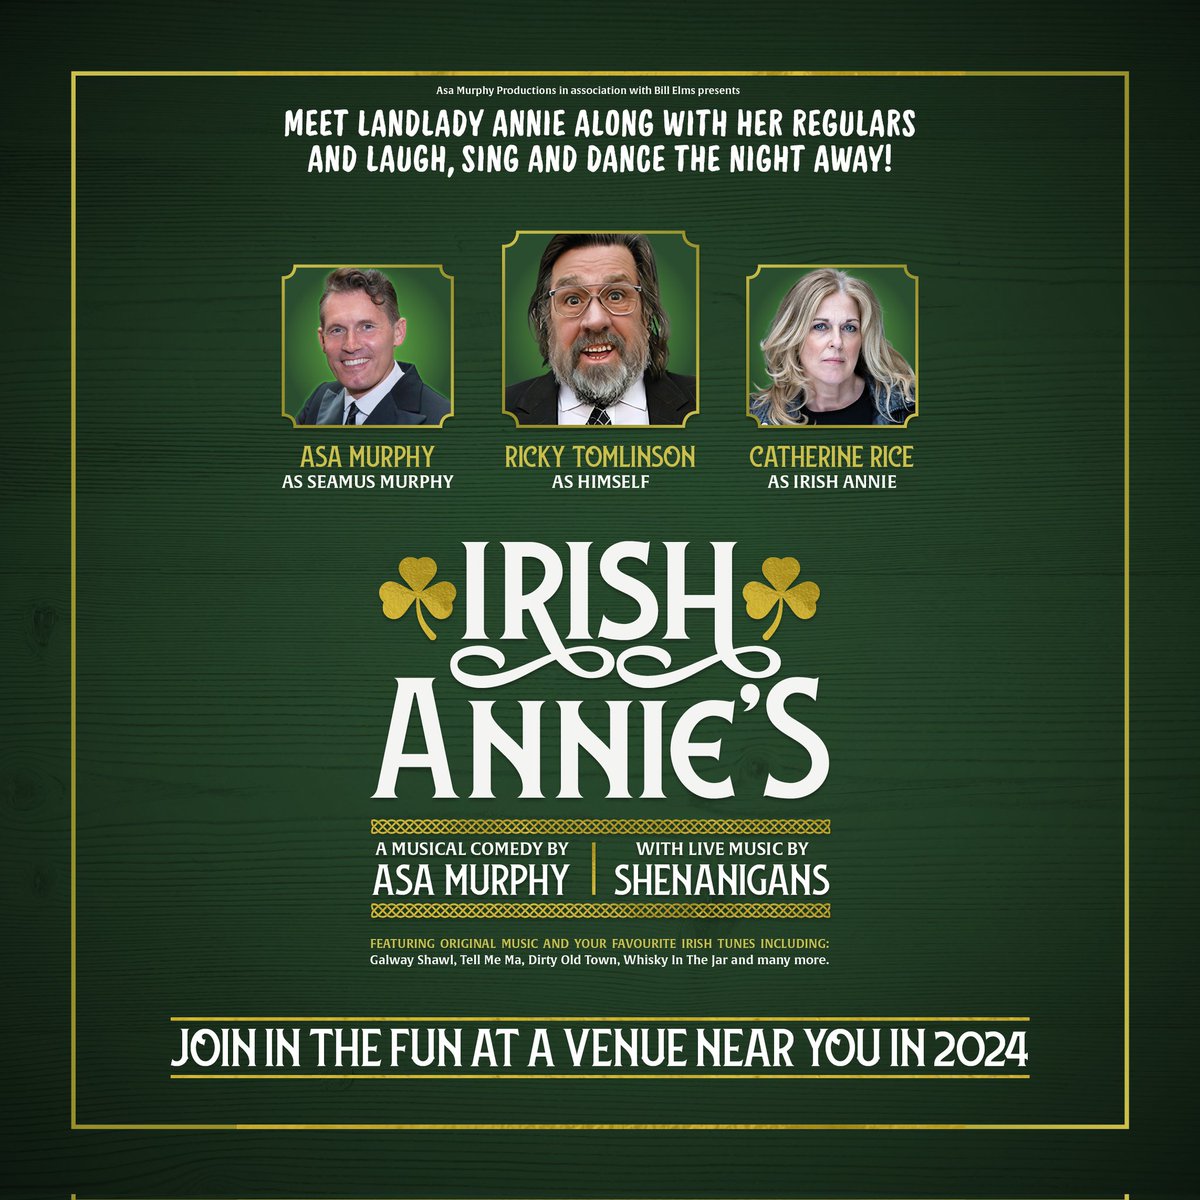 ⭐ New show on sale tomorrow ⭐ Irish Annie's Saturday 4th May 2024 Starring @RickyTomlinson_ @AsaMurphy1 @BillElms productions